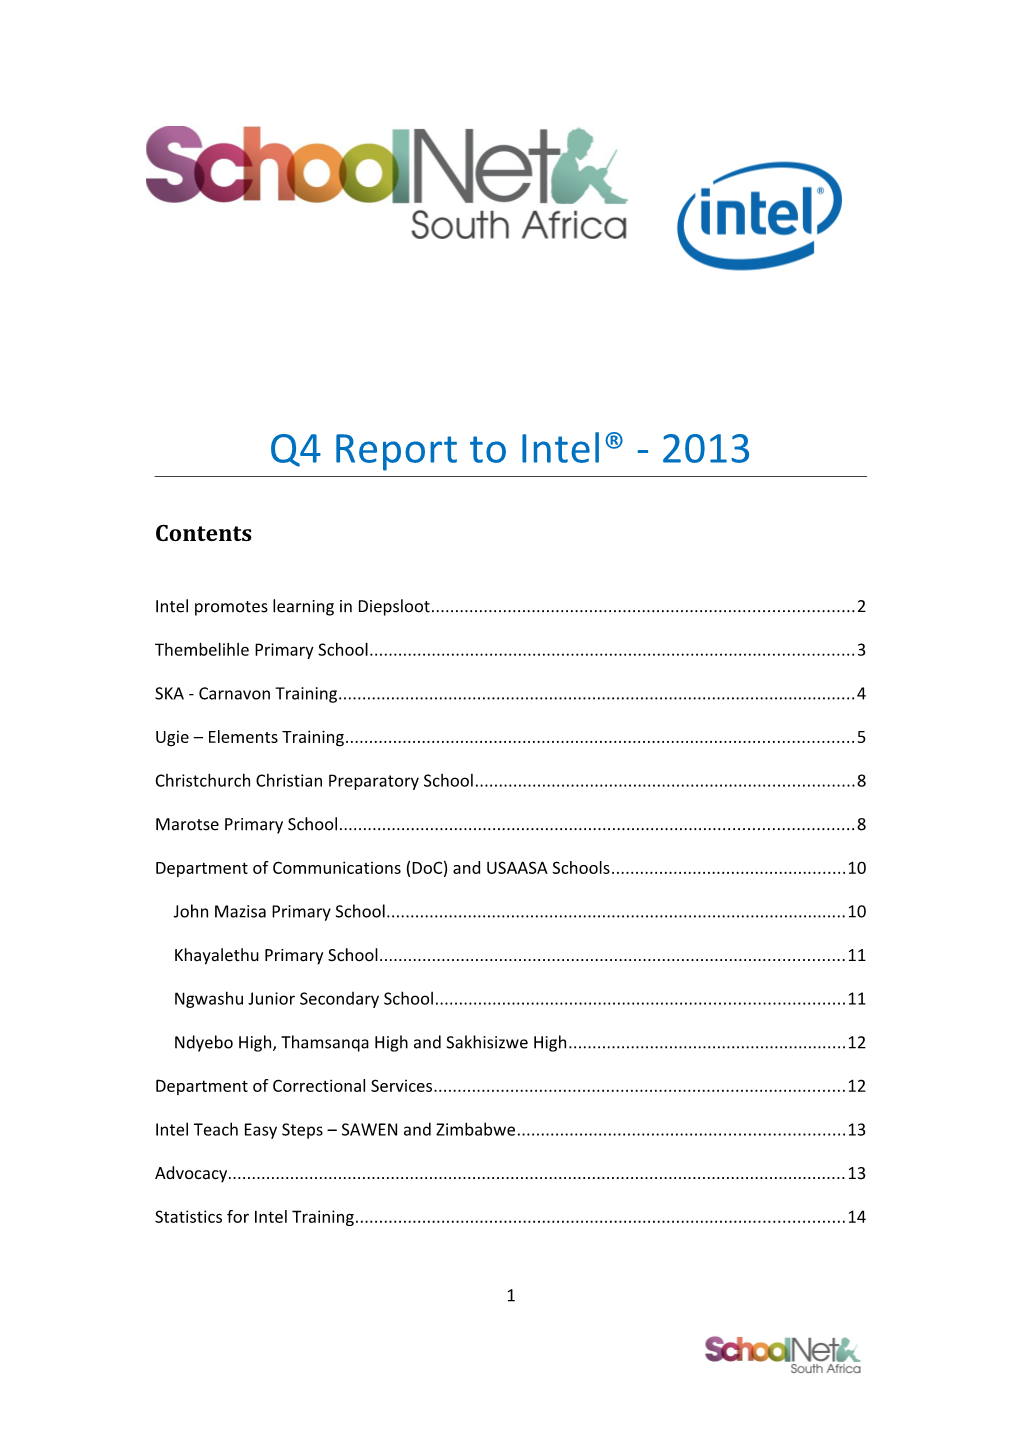 Intel Promotes Learning in Diepsloot 2